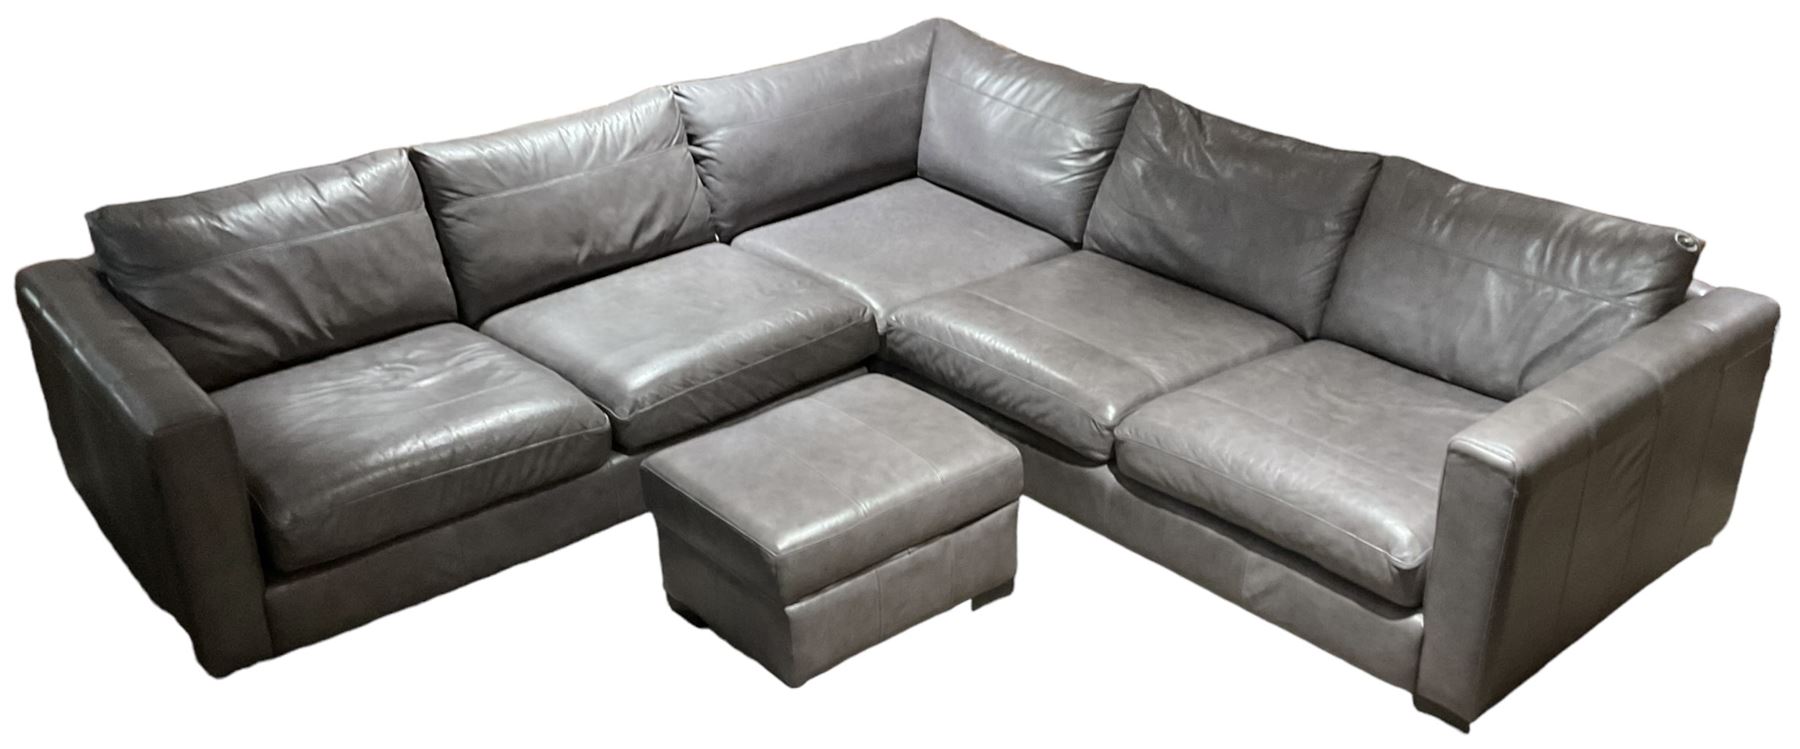 Sofa Workshop - five-seat corner sofa; matching footstool; upholstered in Italian grey leather - Image 6 of 7